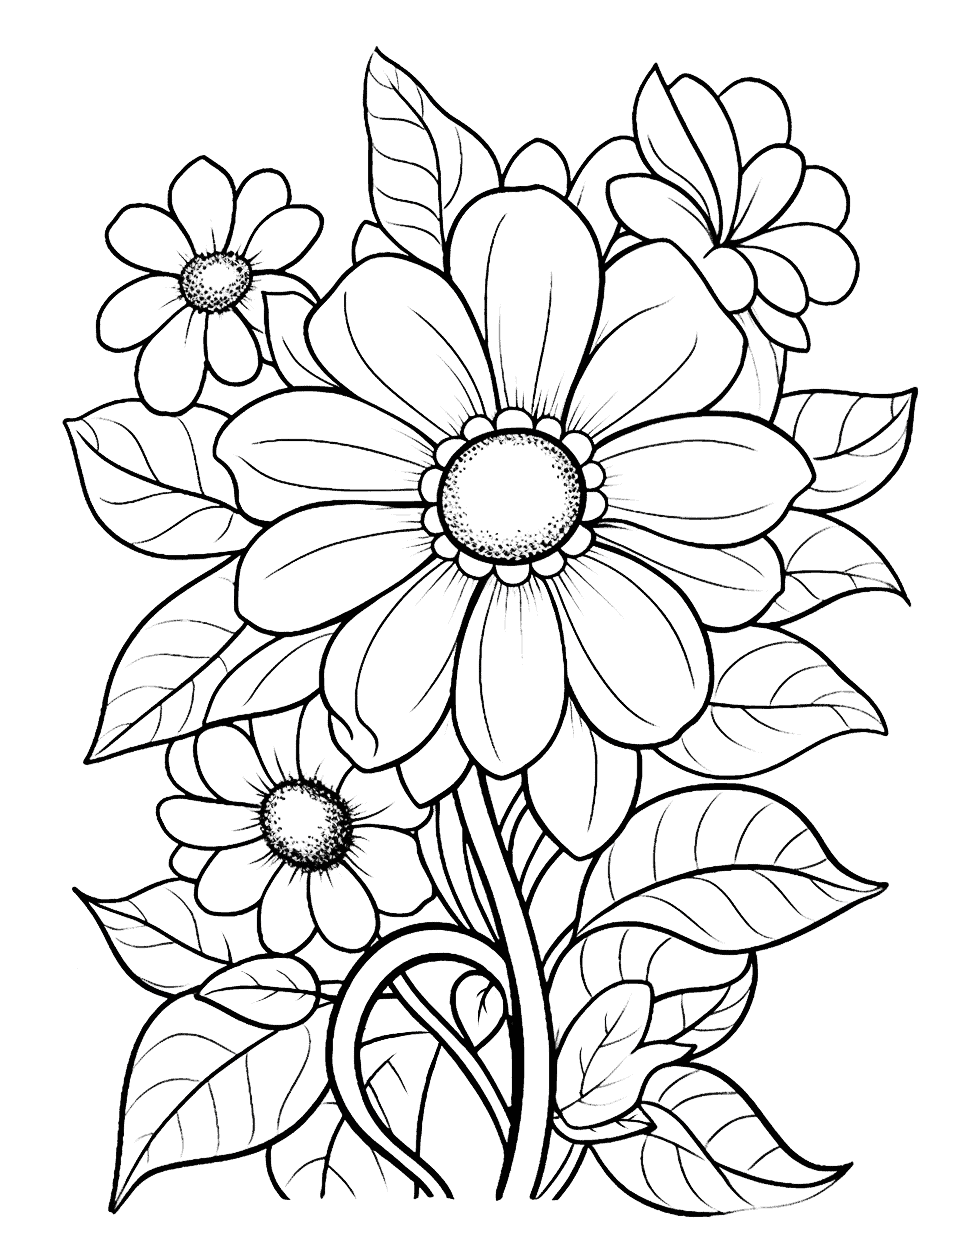 Floral Fantasy Flower Coloring Page - An array of different beautiful flowers, perfect for older children.